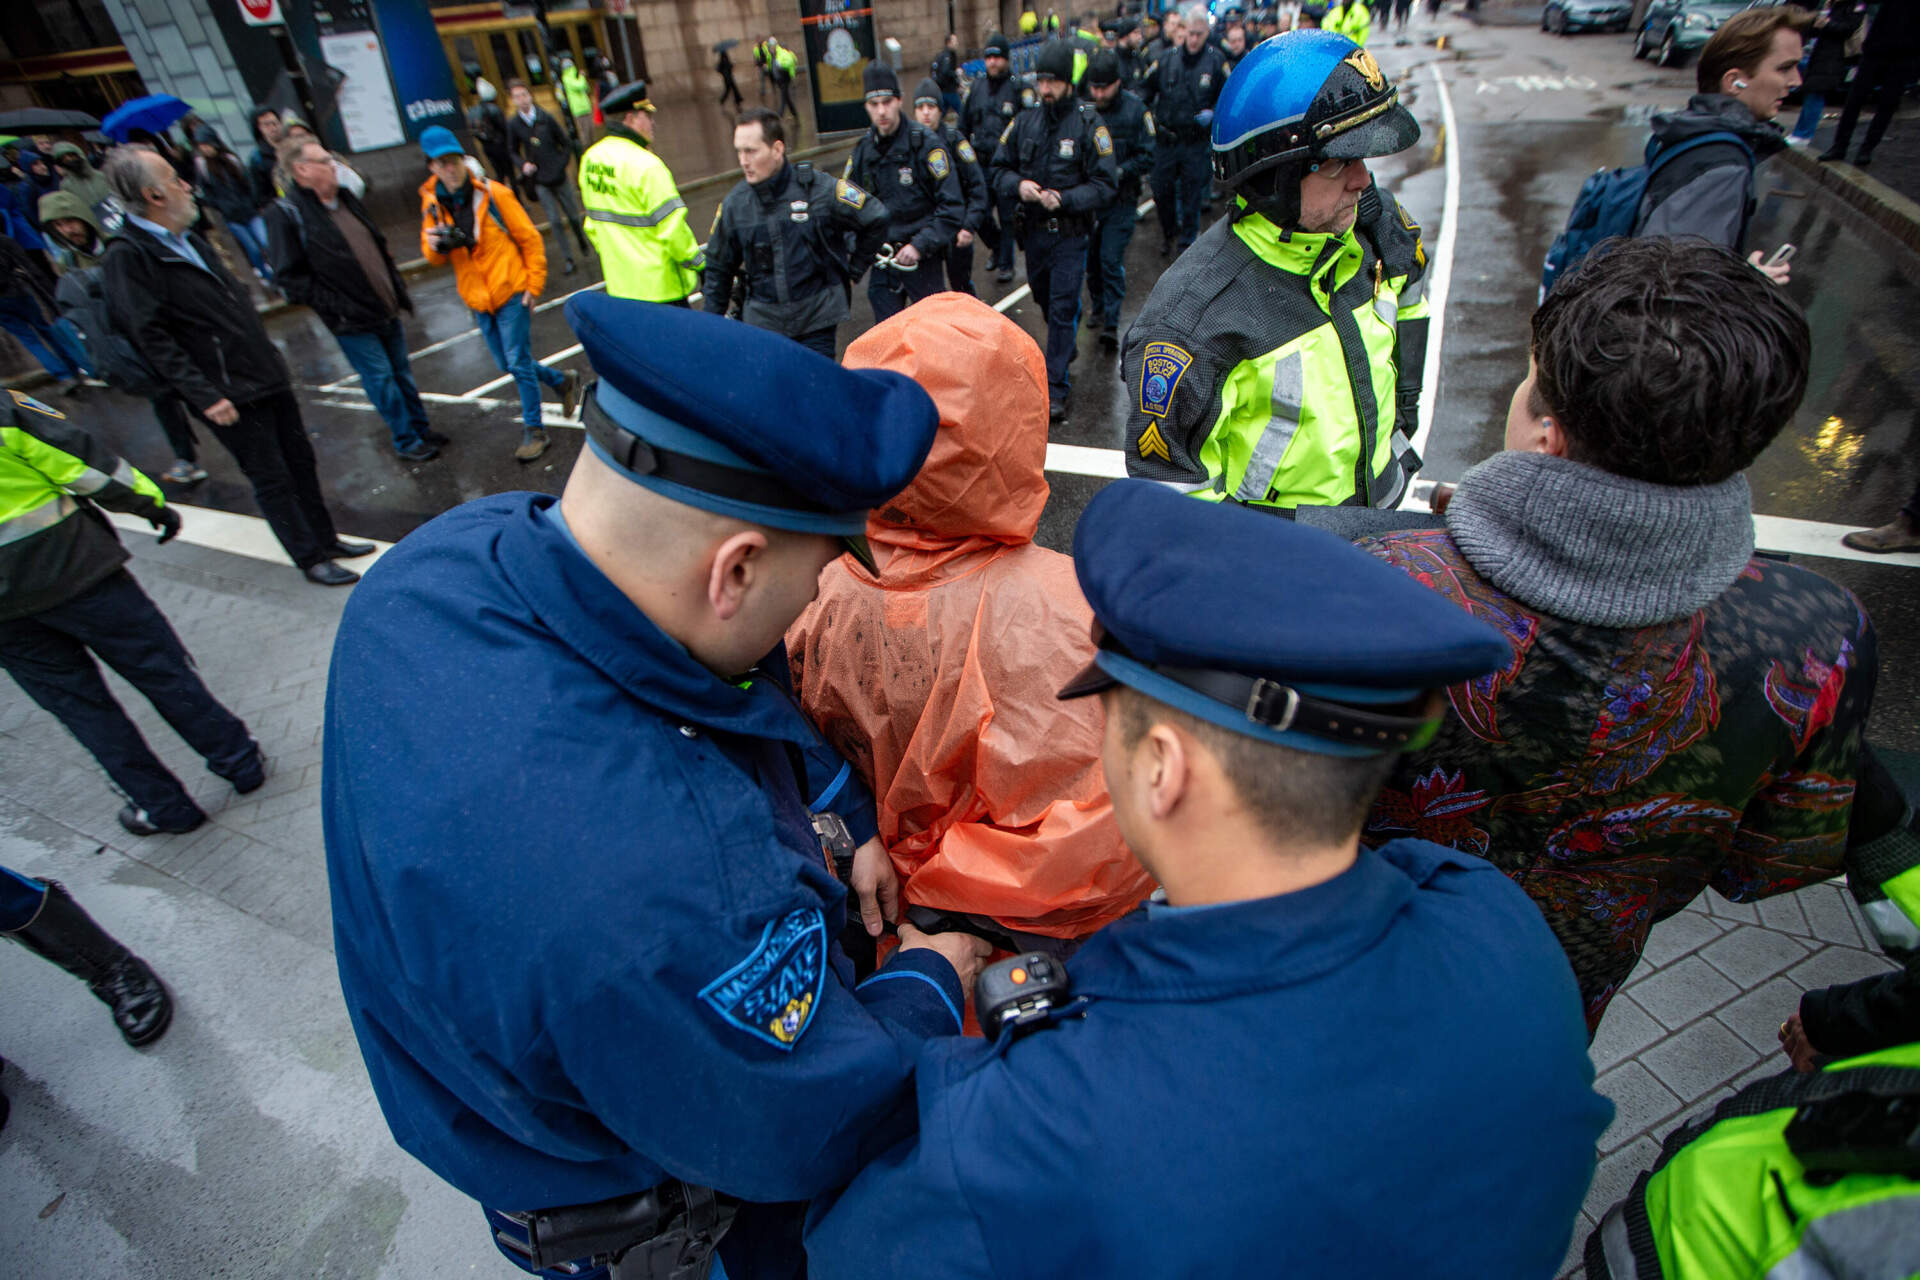 Massachusetts State Police troopers also assisted city police with arrests. (Jesse Costa/WBUR)